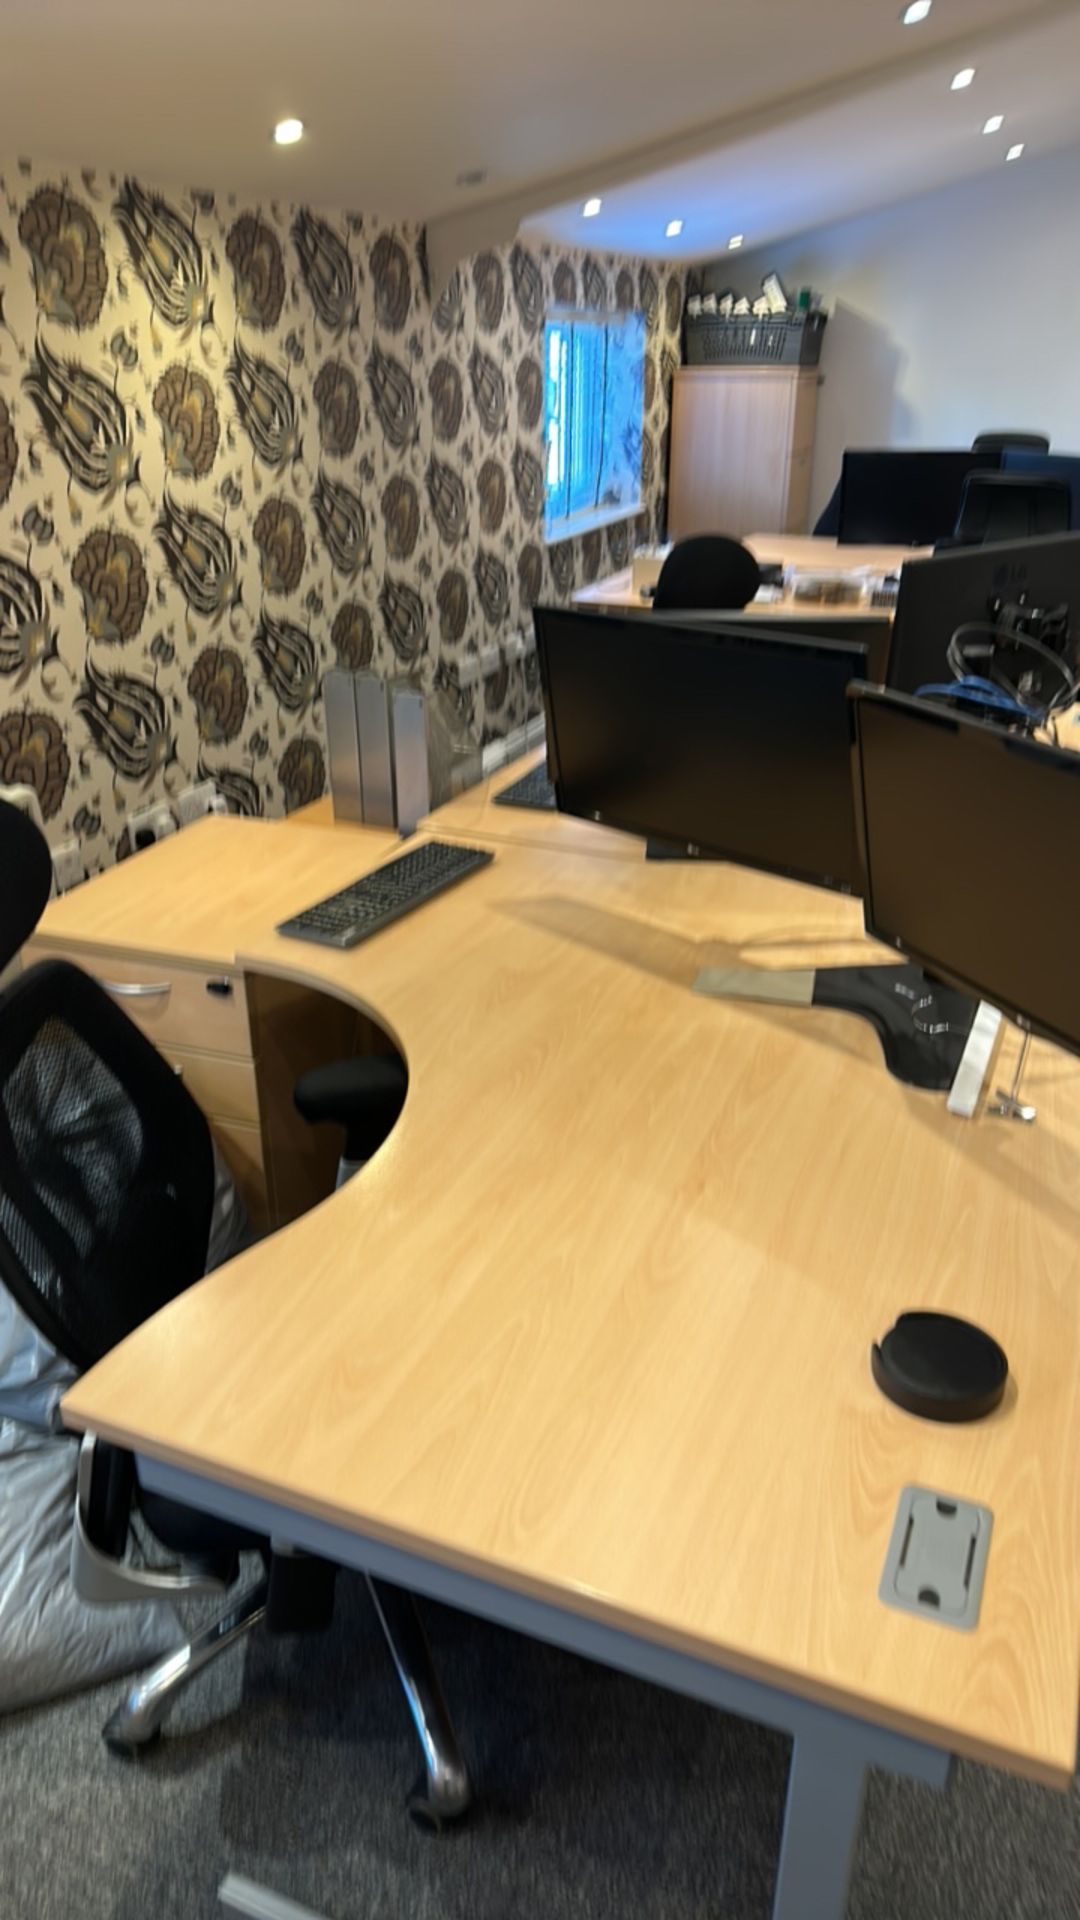 Pair of curved offices desks with chairs, monitors and keyboard - Image 5 of 5